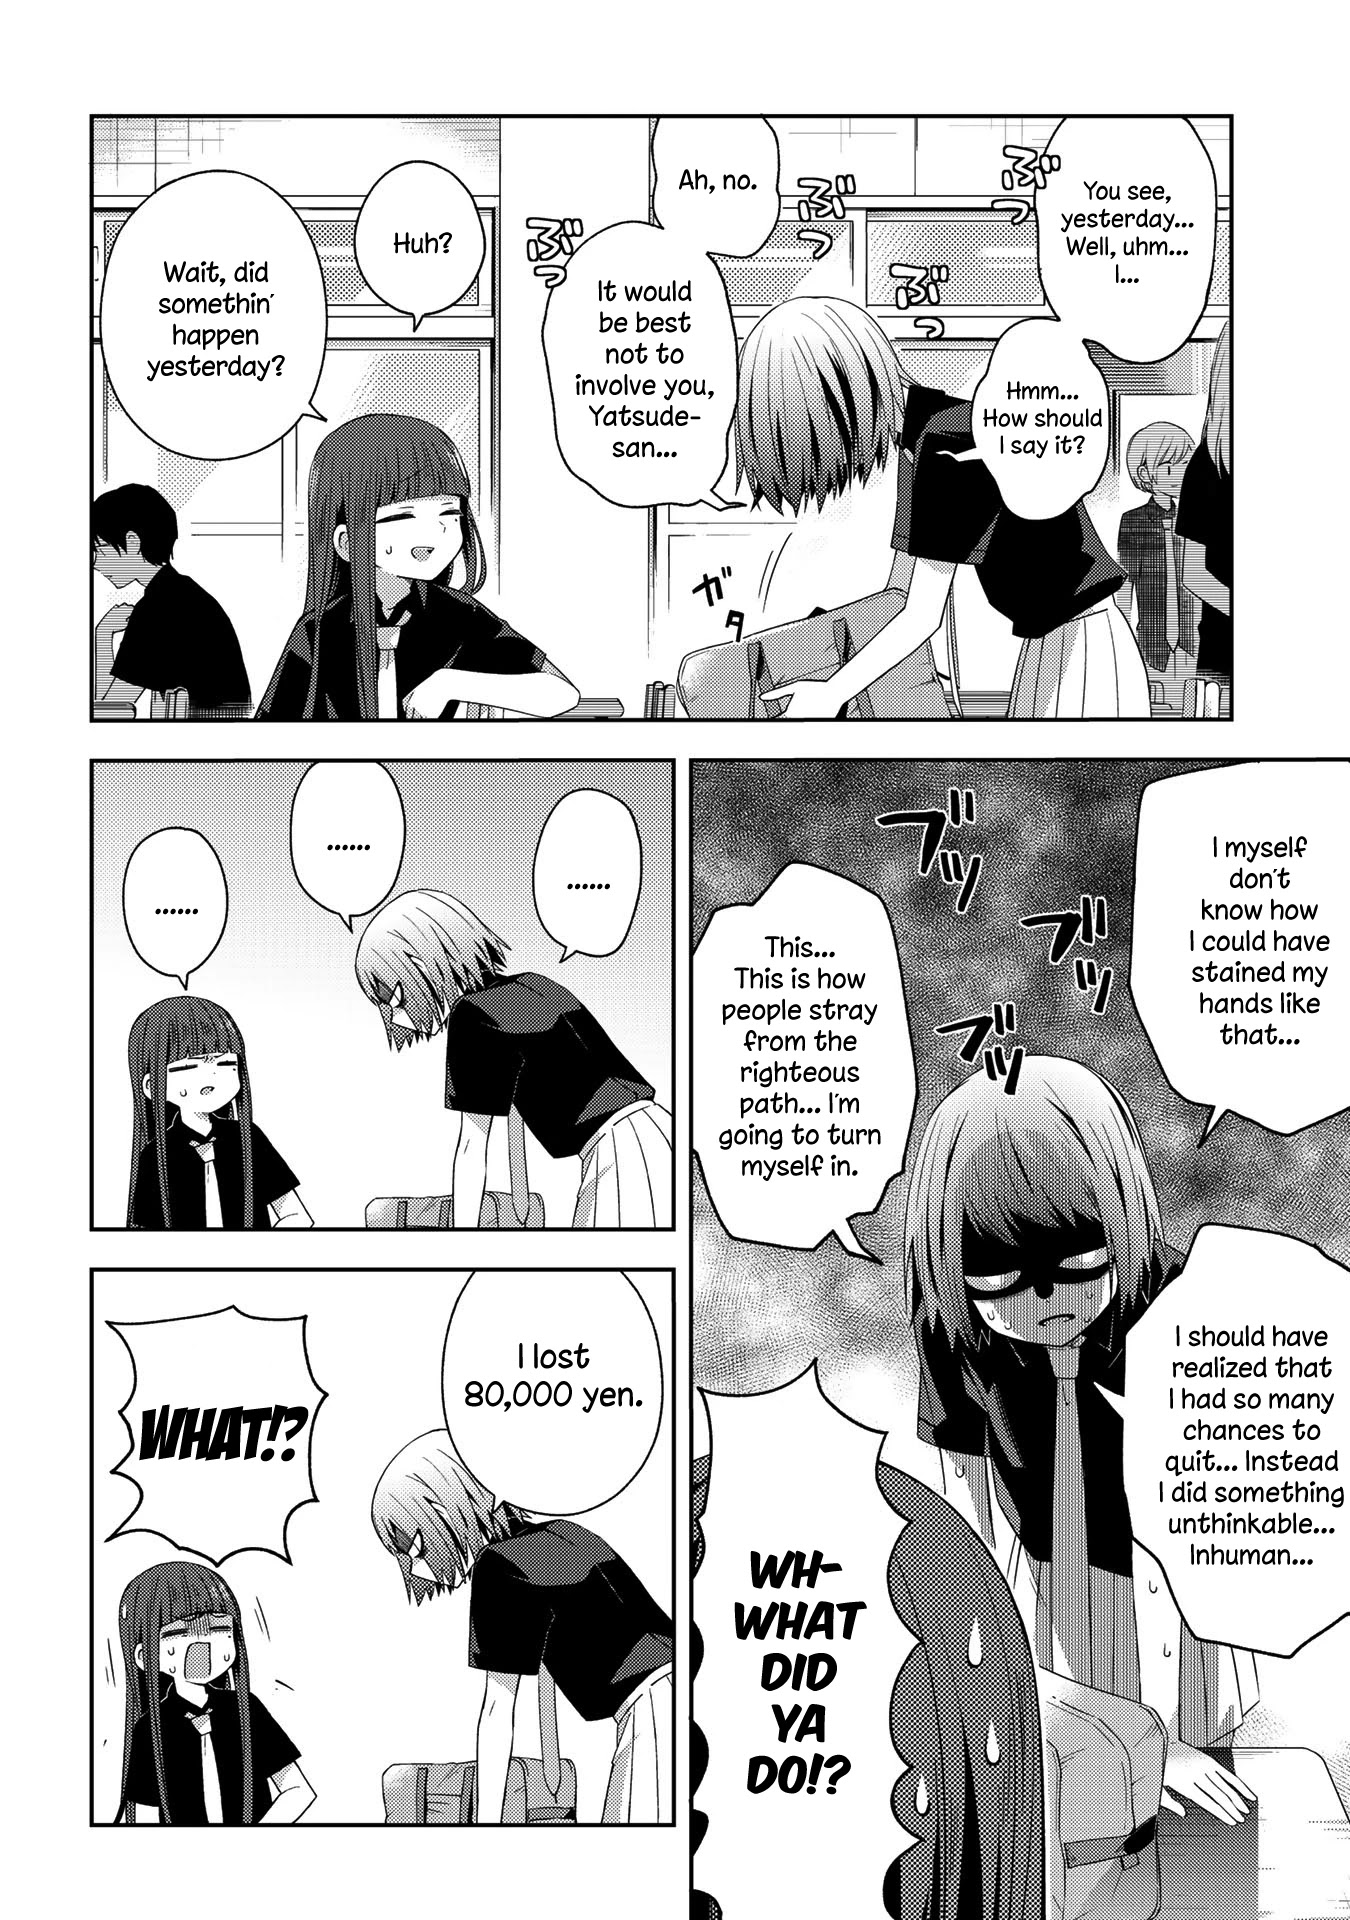 School Zone (Ningiyau) Chapter 33: I'm Going To Turn Myself In. - Picture 2